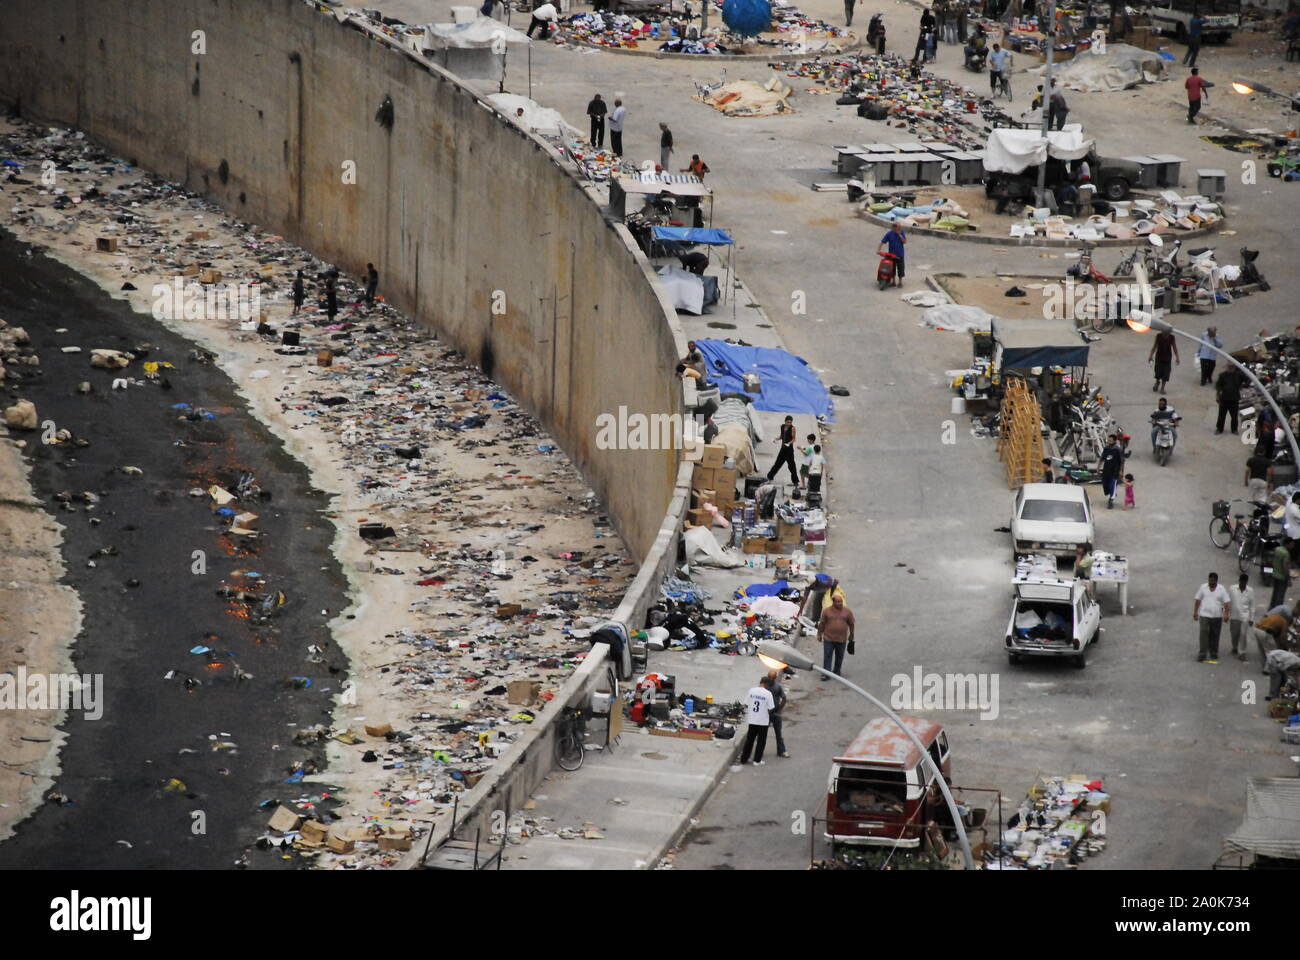 November 16, 2005: Street market and sewer system in Beirut Stock Photo